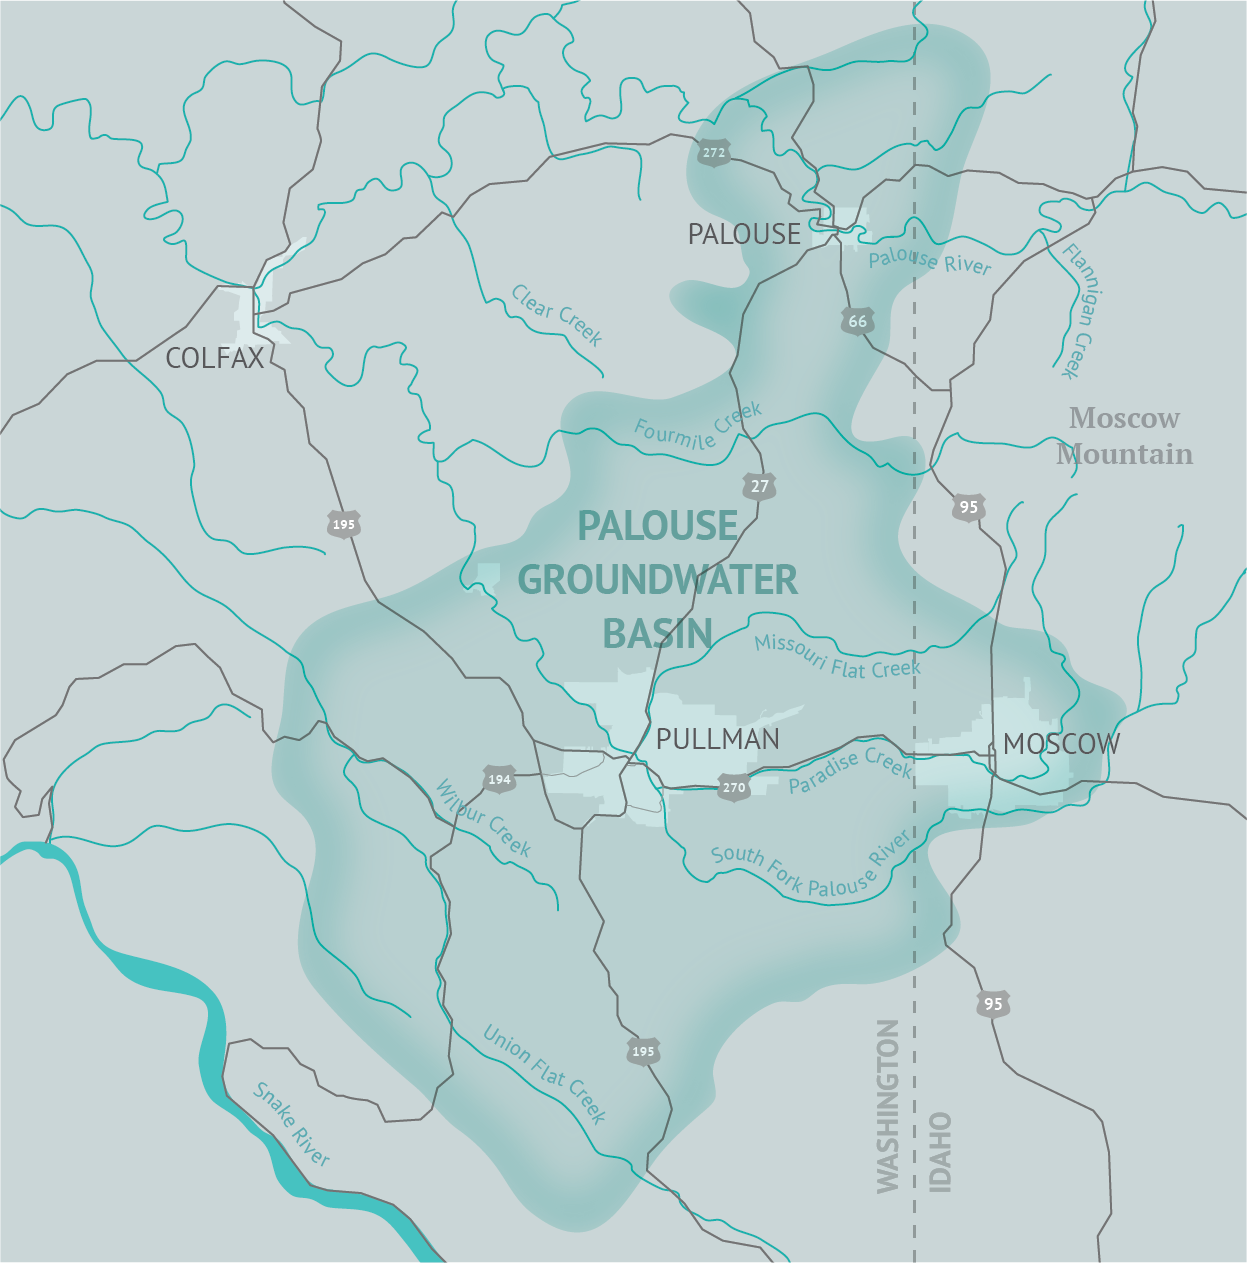 Map of Palouse Groundwater Basin Boundary - gray background with black and teal lines representing roadways and waterways, with a dark teal border representing the basin boundary.